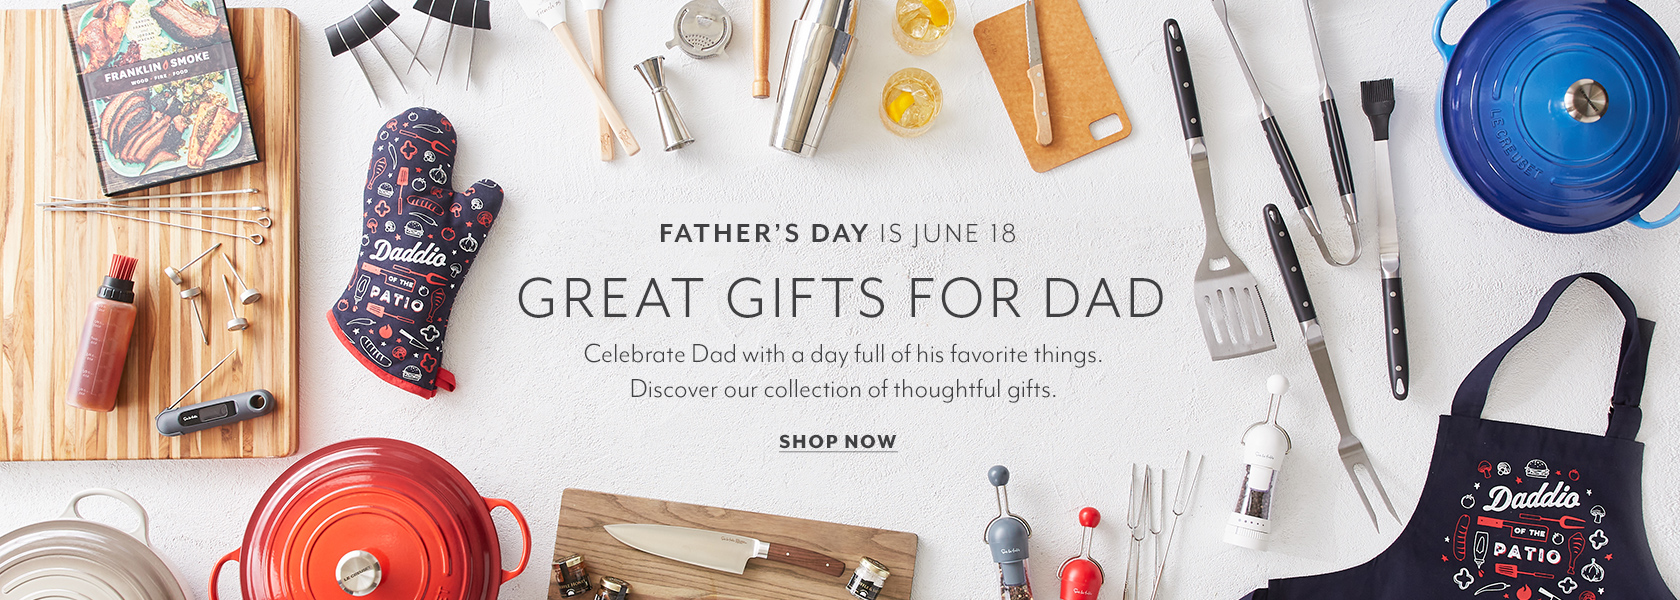 Father's Day is June 18. Great Gifts for Dad. Shop now. Grilling tools and apron.